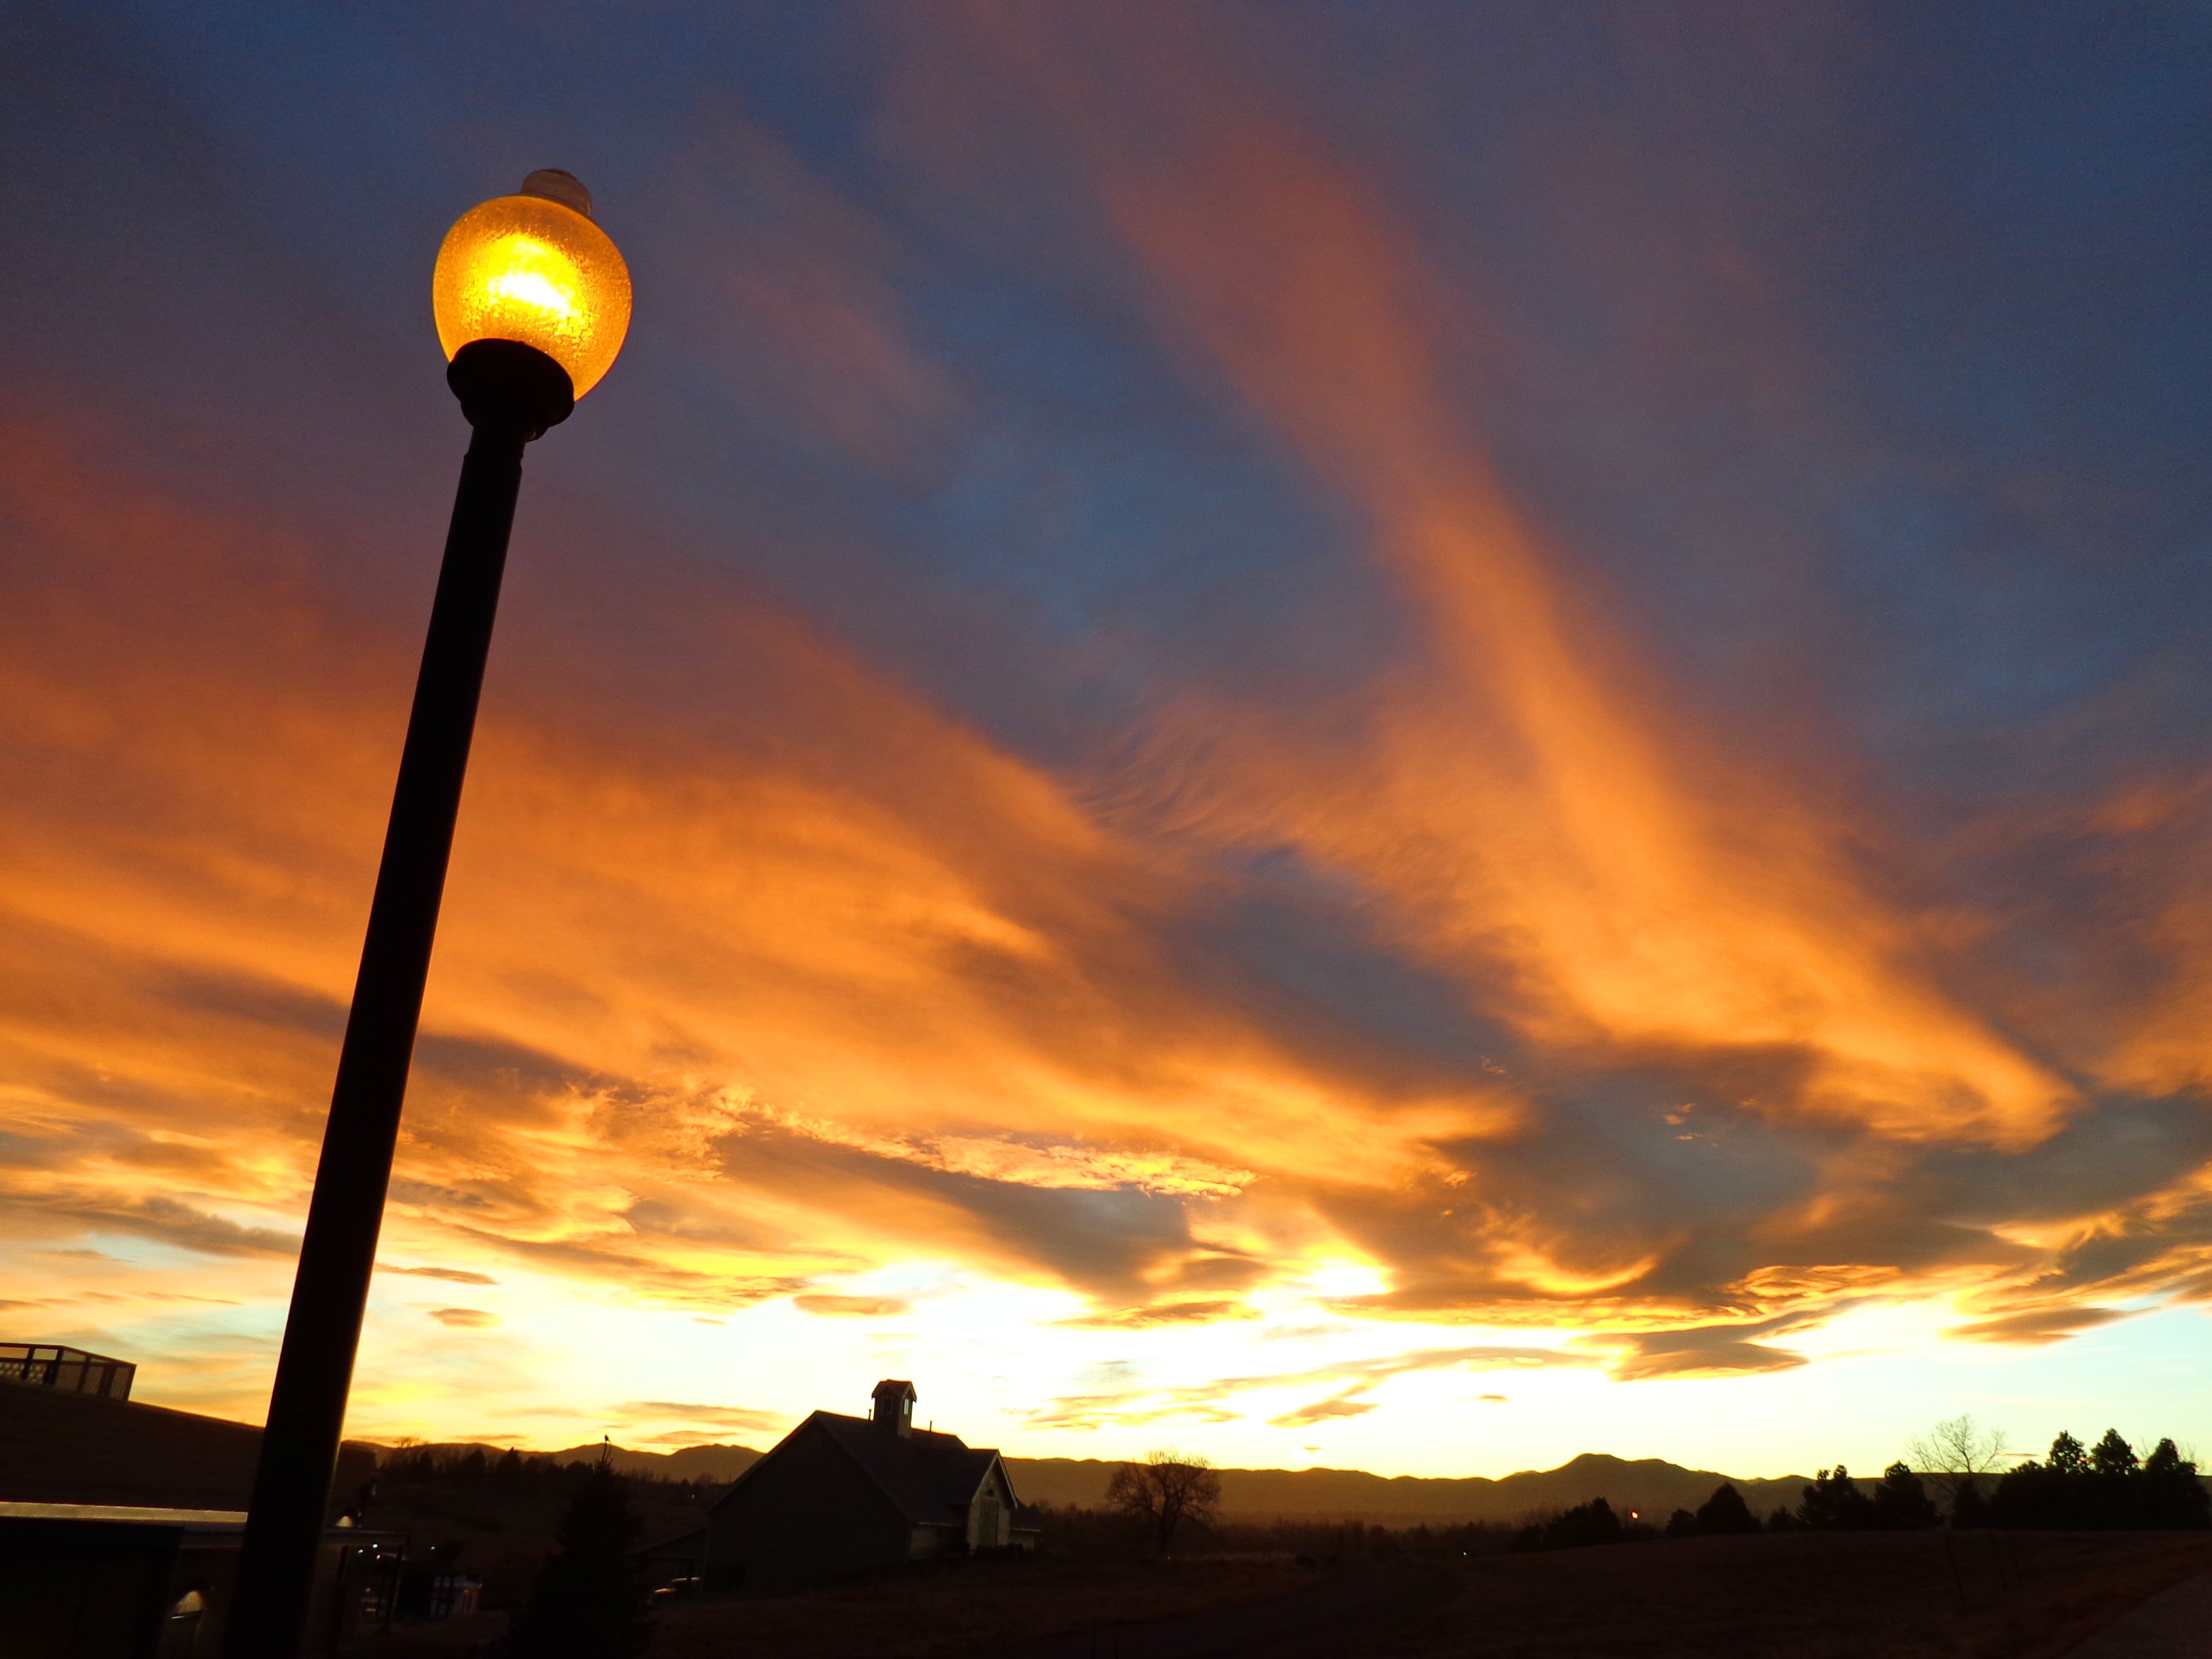 Sunset with Lamp Post in Foreground Picture | Free Photograph | Photos